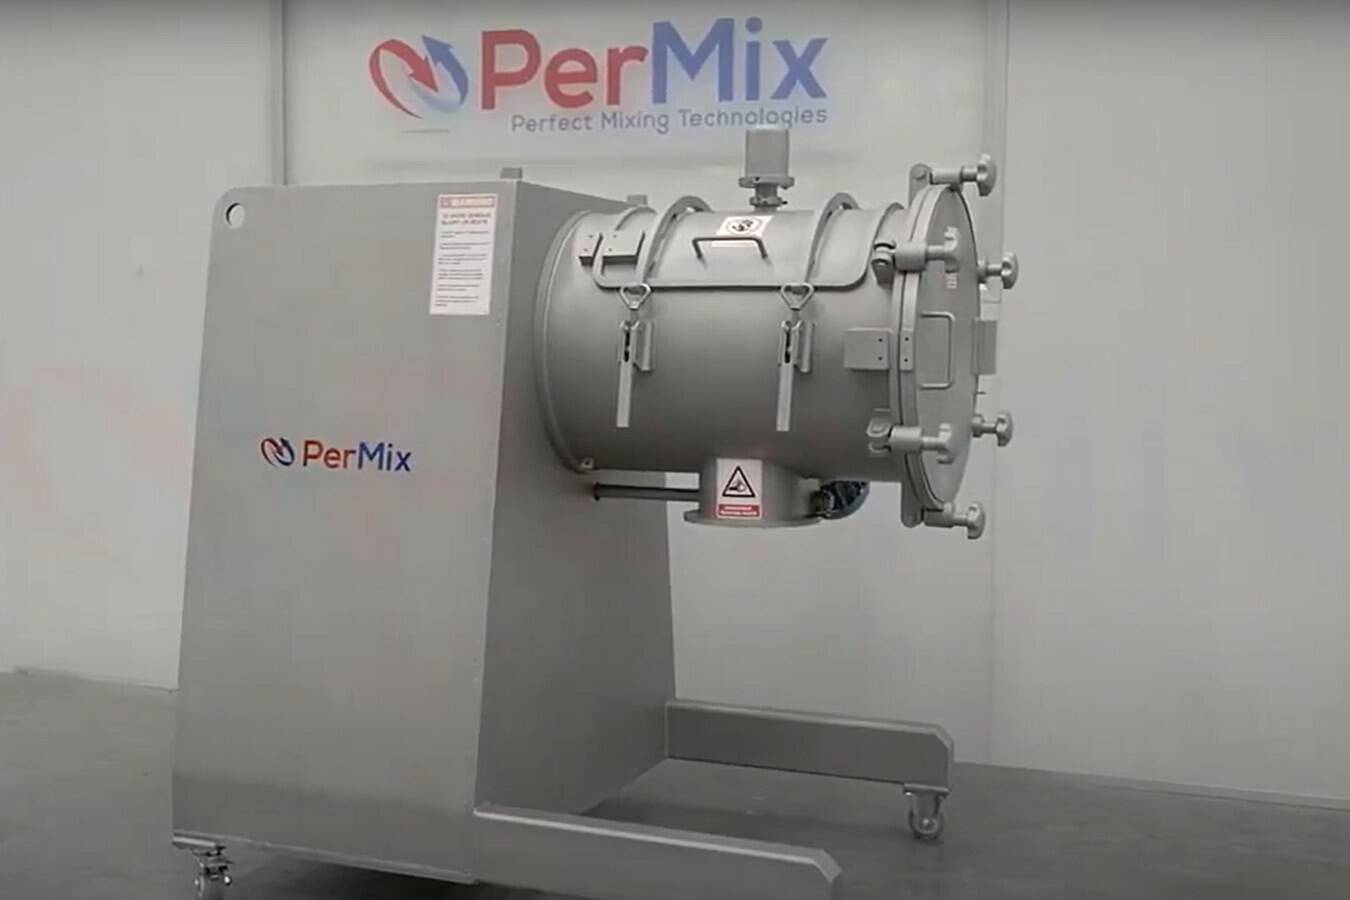 PerMix Hybrid Paddle and Plow Mixer, a 2-in-1 Powerhouse PerMix Hybrid is a Paddle Mixer & Plow Mixer all-in-one powerhouse.  It allows you to switch between a paddle mixer and plow mixer with ease.  This allows for the ultimate in diversity.